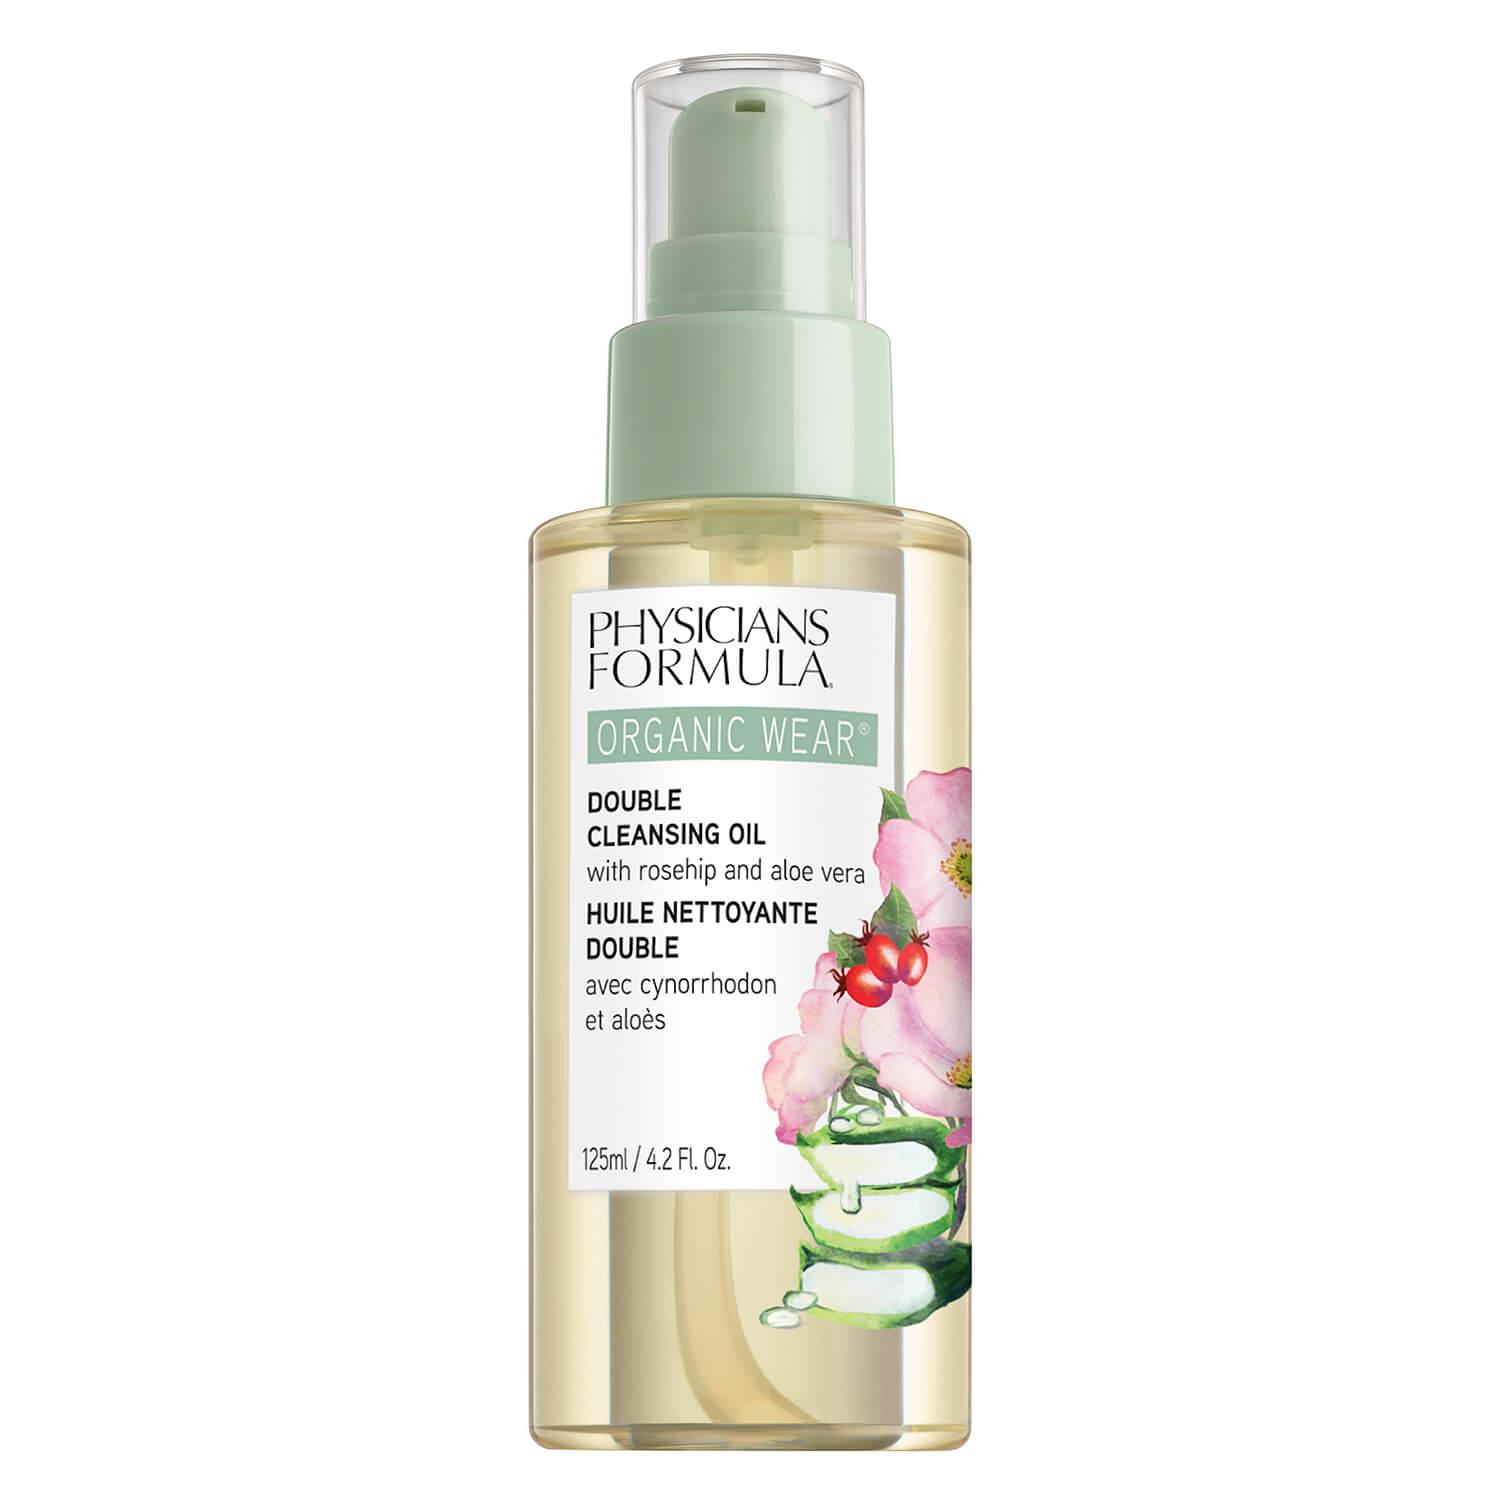 PHYSICIANS FORMULA - Organic Wear Double Cleansing Oil